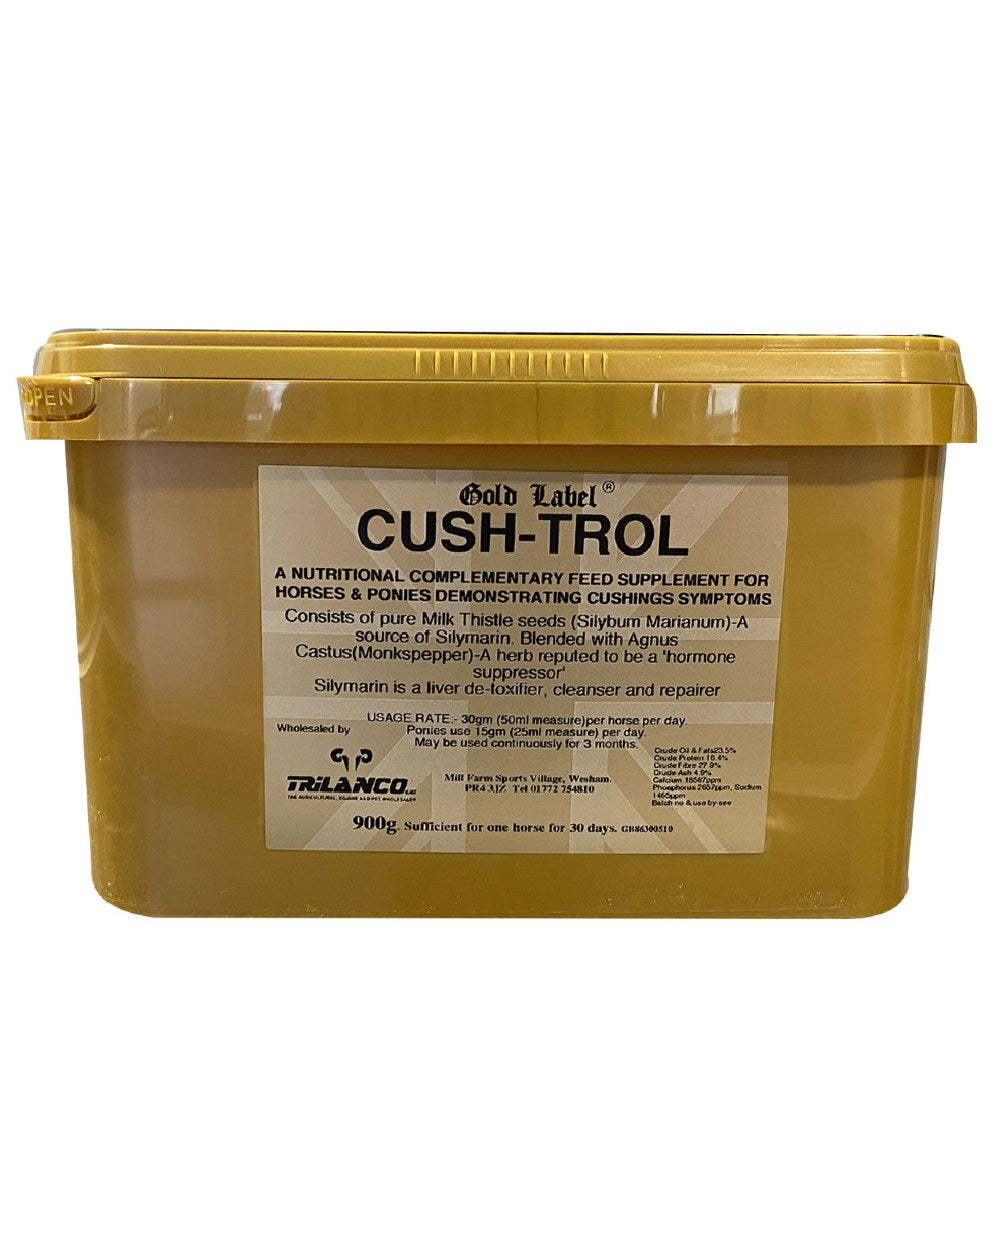 Gold Label Cush-Trol On A White Background